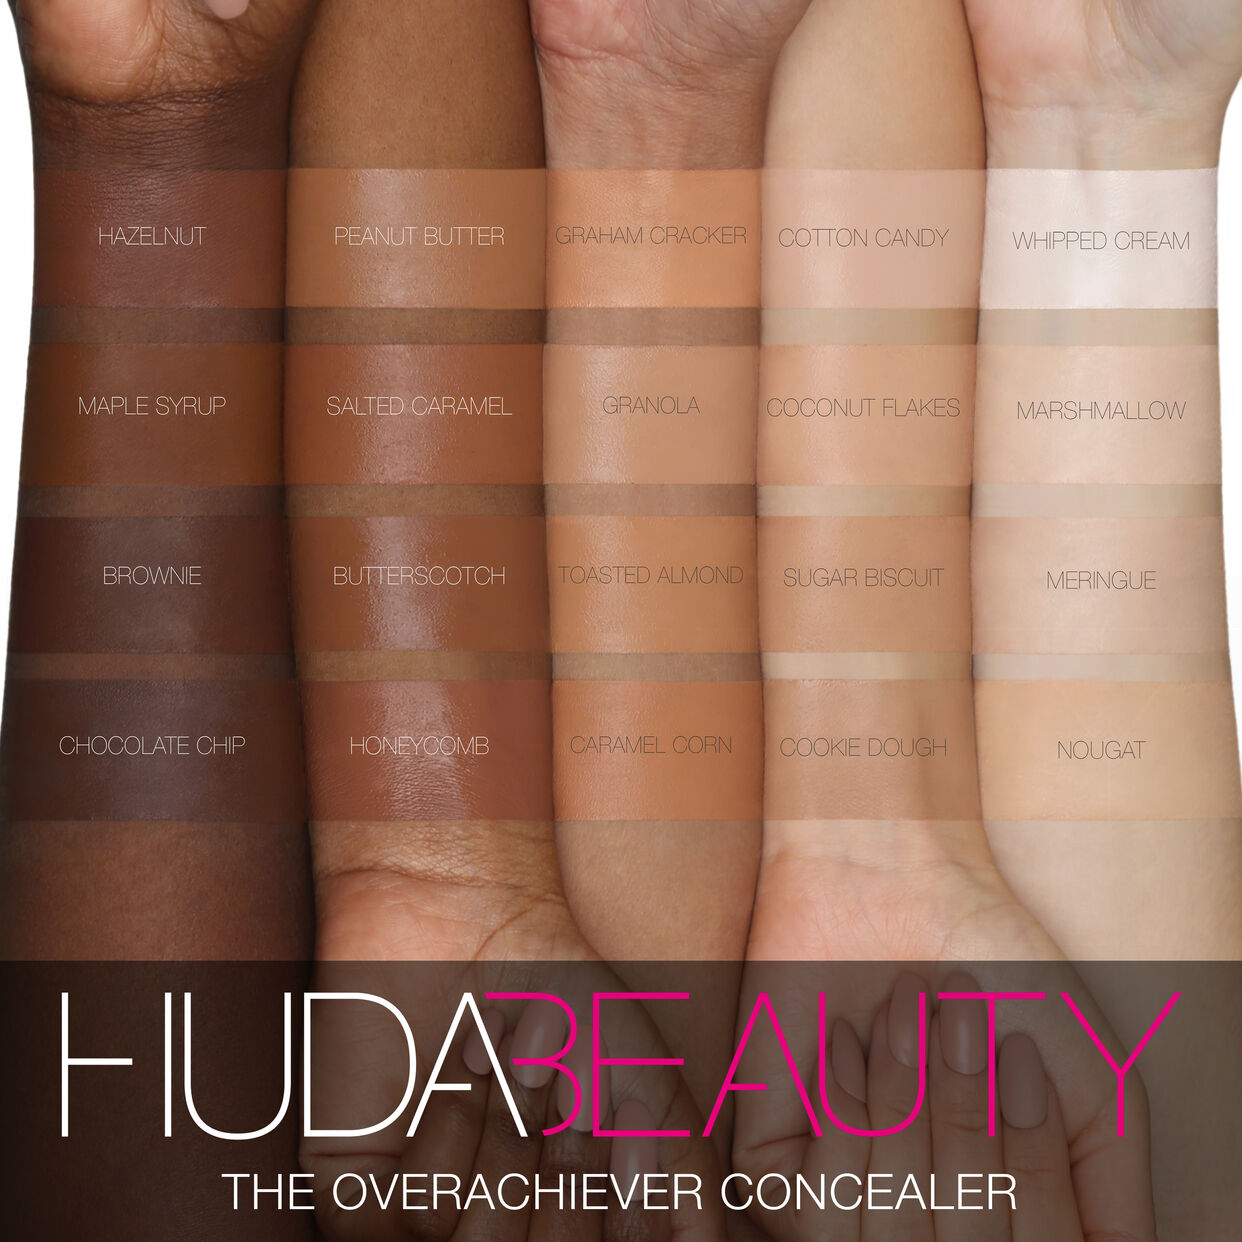 Huda Beauty "Maple Syrup" The Overachiever Concealer